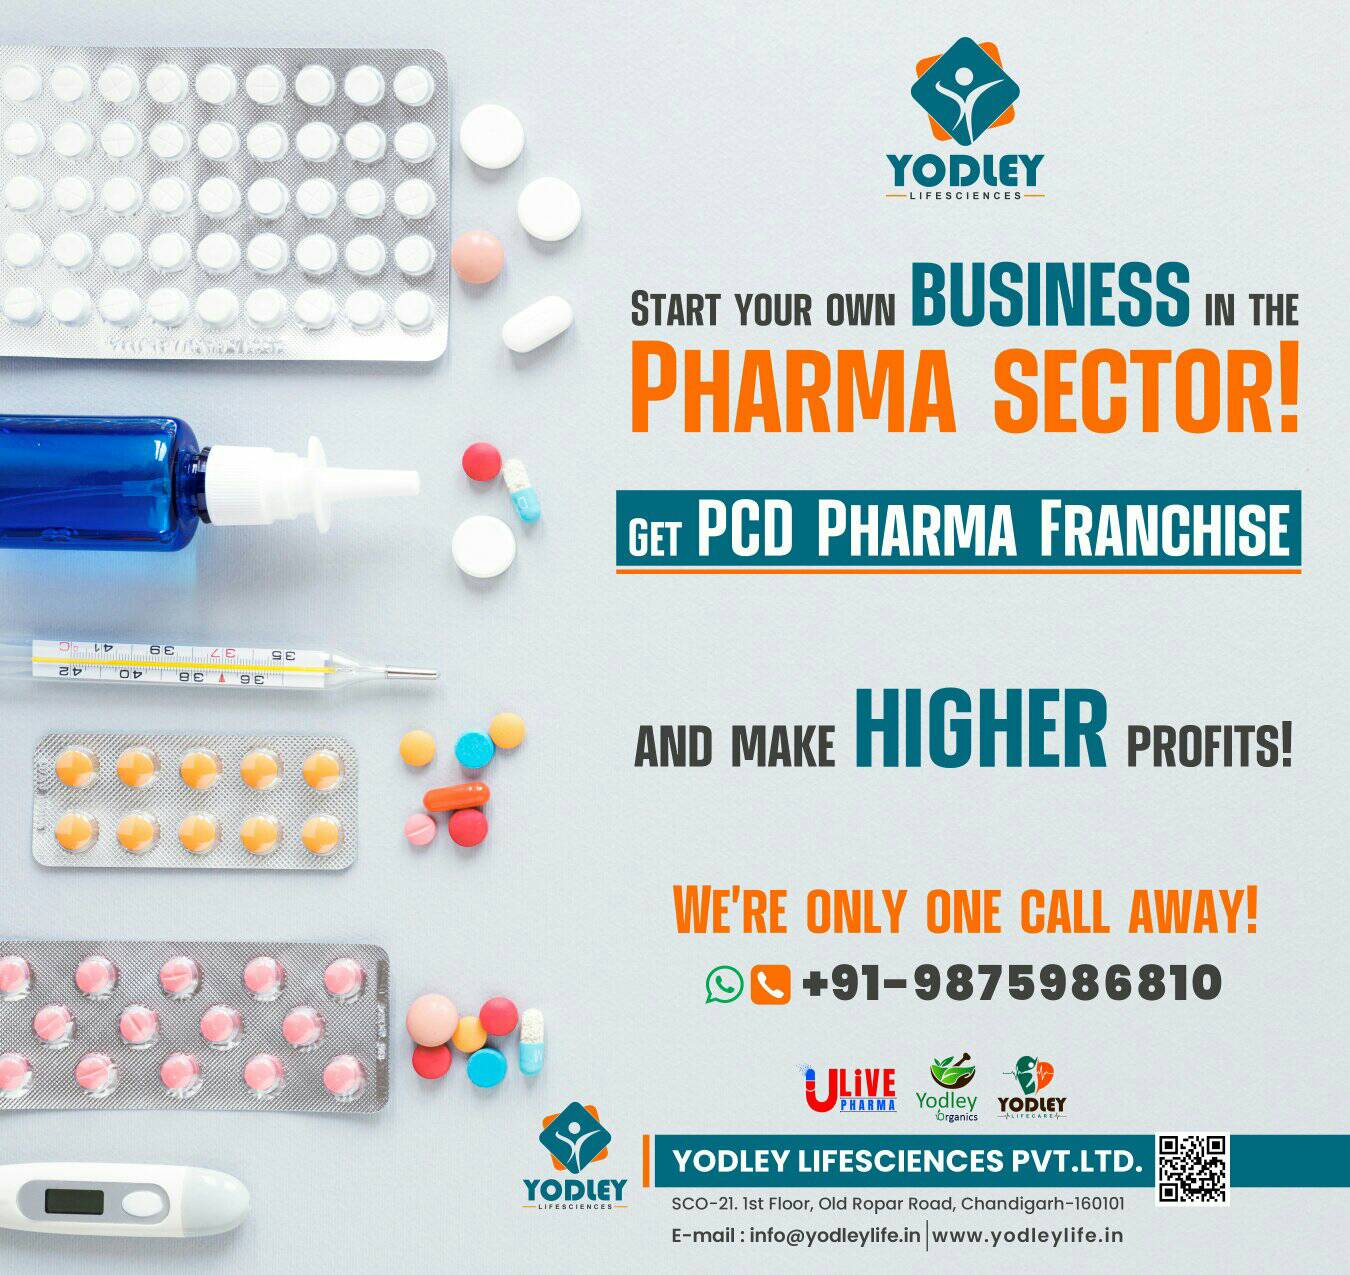 ’ nl ptt gt” YODLEY

ile starr vou own BUSINESS w me
~ PHARMA SECTOR!

ger PCD PHARMA FRANCHISE
ano make HIGHER prorirs:

WE'RE ONLY ONE CALL AWAY!
© +91-9875986810

 

|
ule &amp; 8
Oo | EEE =
[E54

on YODLEY $CO-21. 1st Floor, Old Ropar Road, Chandigarh-160101
BE E-mail : info@yodieylife.in | www.yodleylite.in